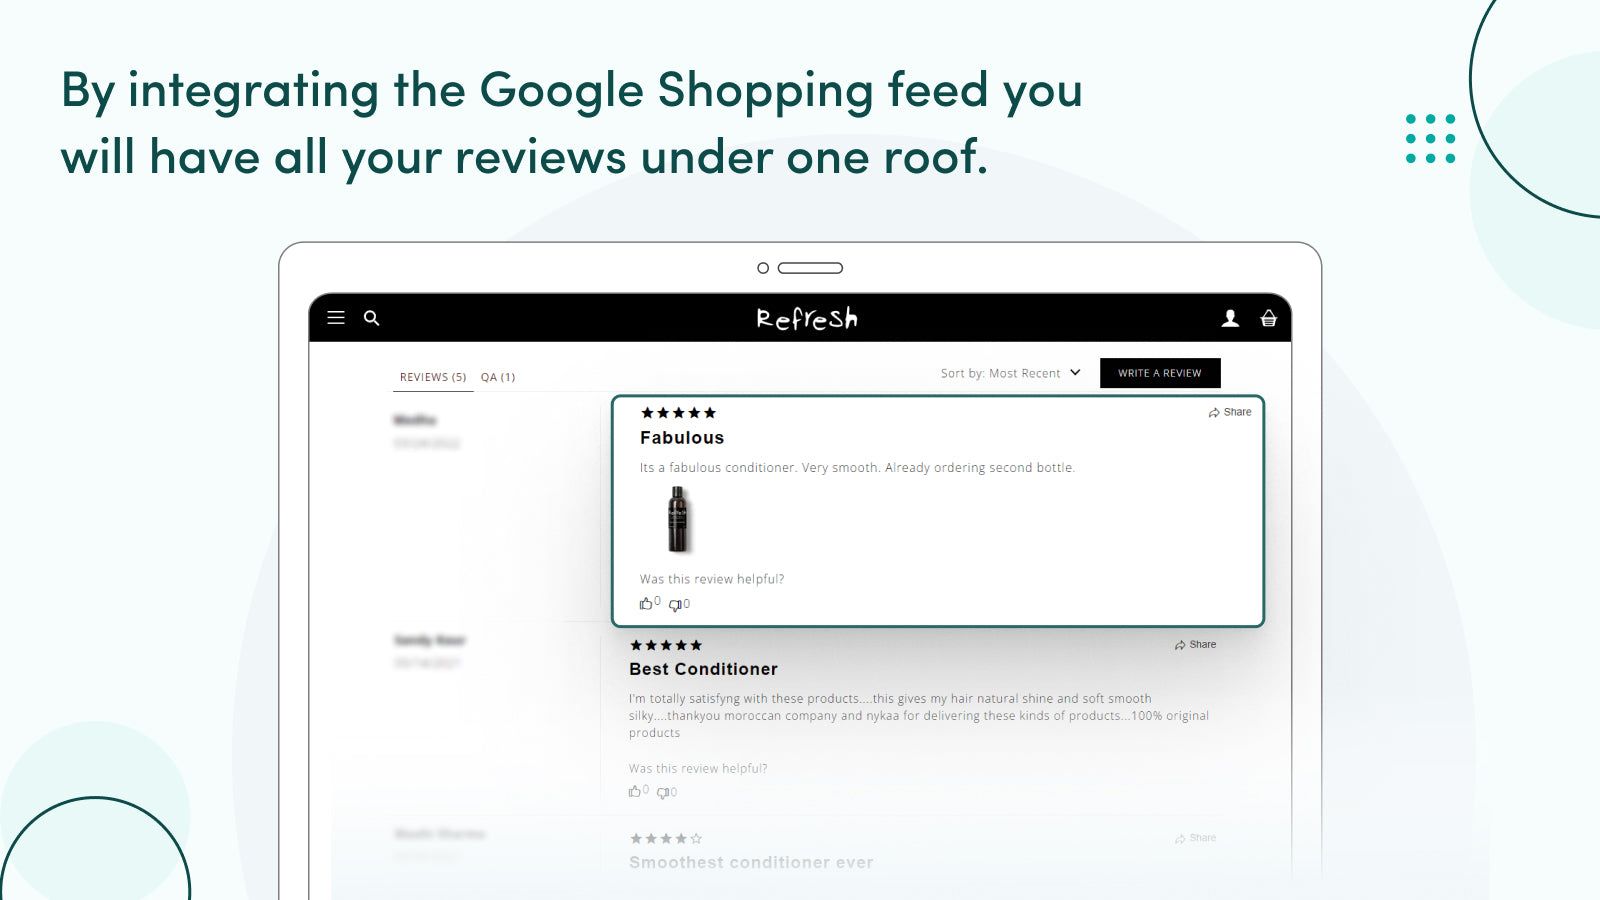 Google Shopping feed gathers all your reviews under one roof.